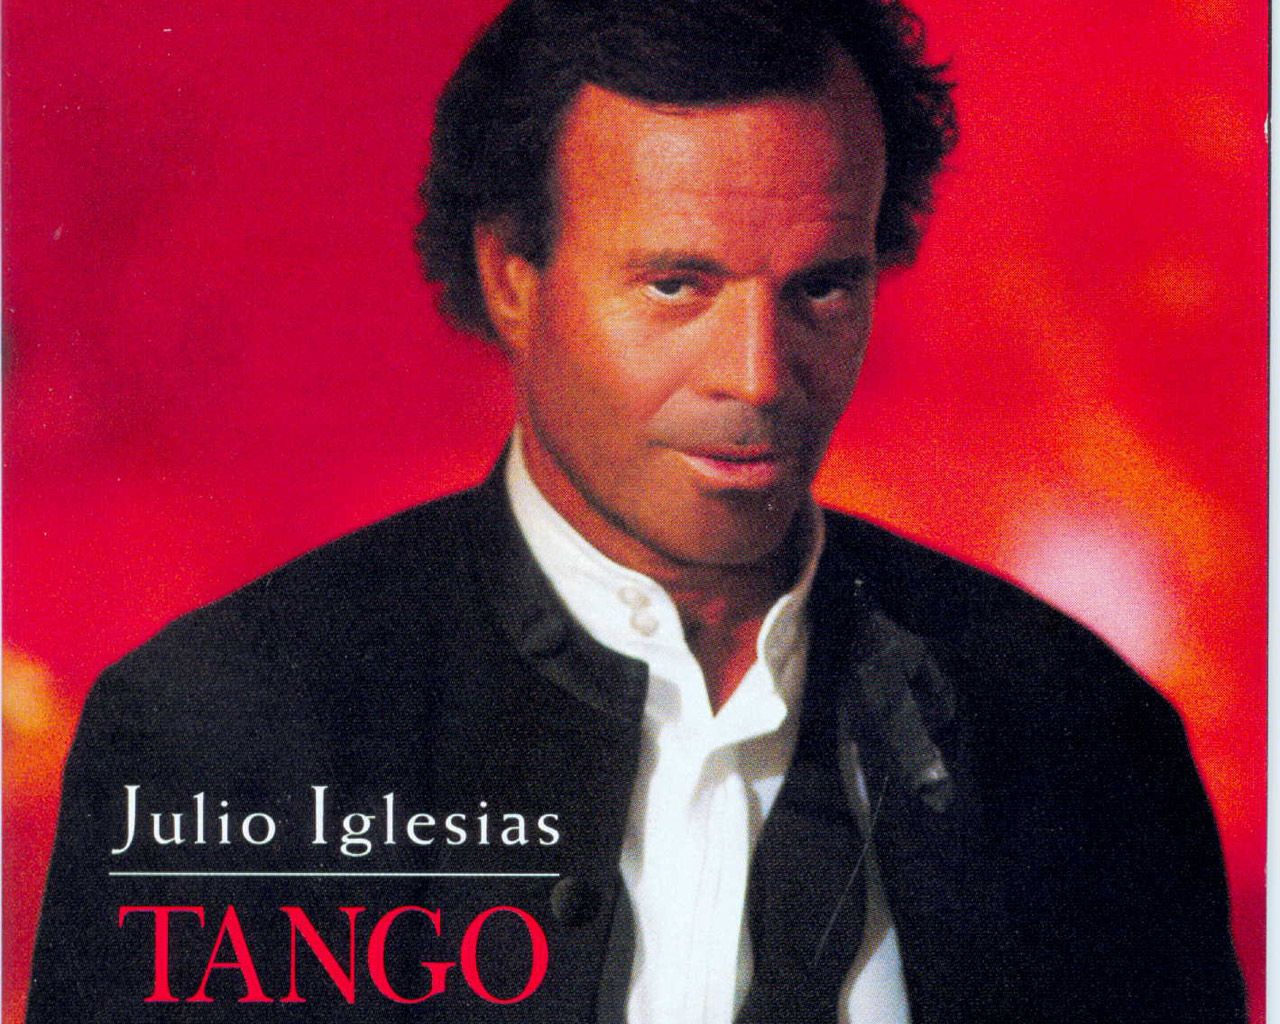 Julio iglesias my love song download mp3